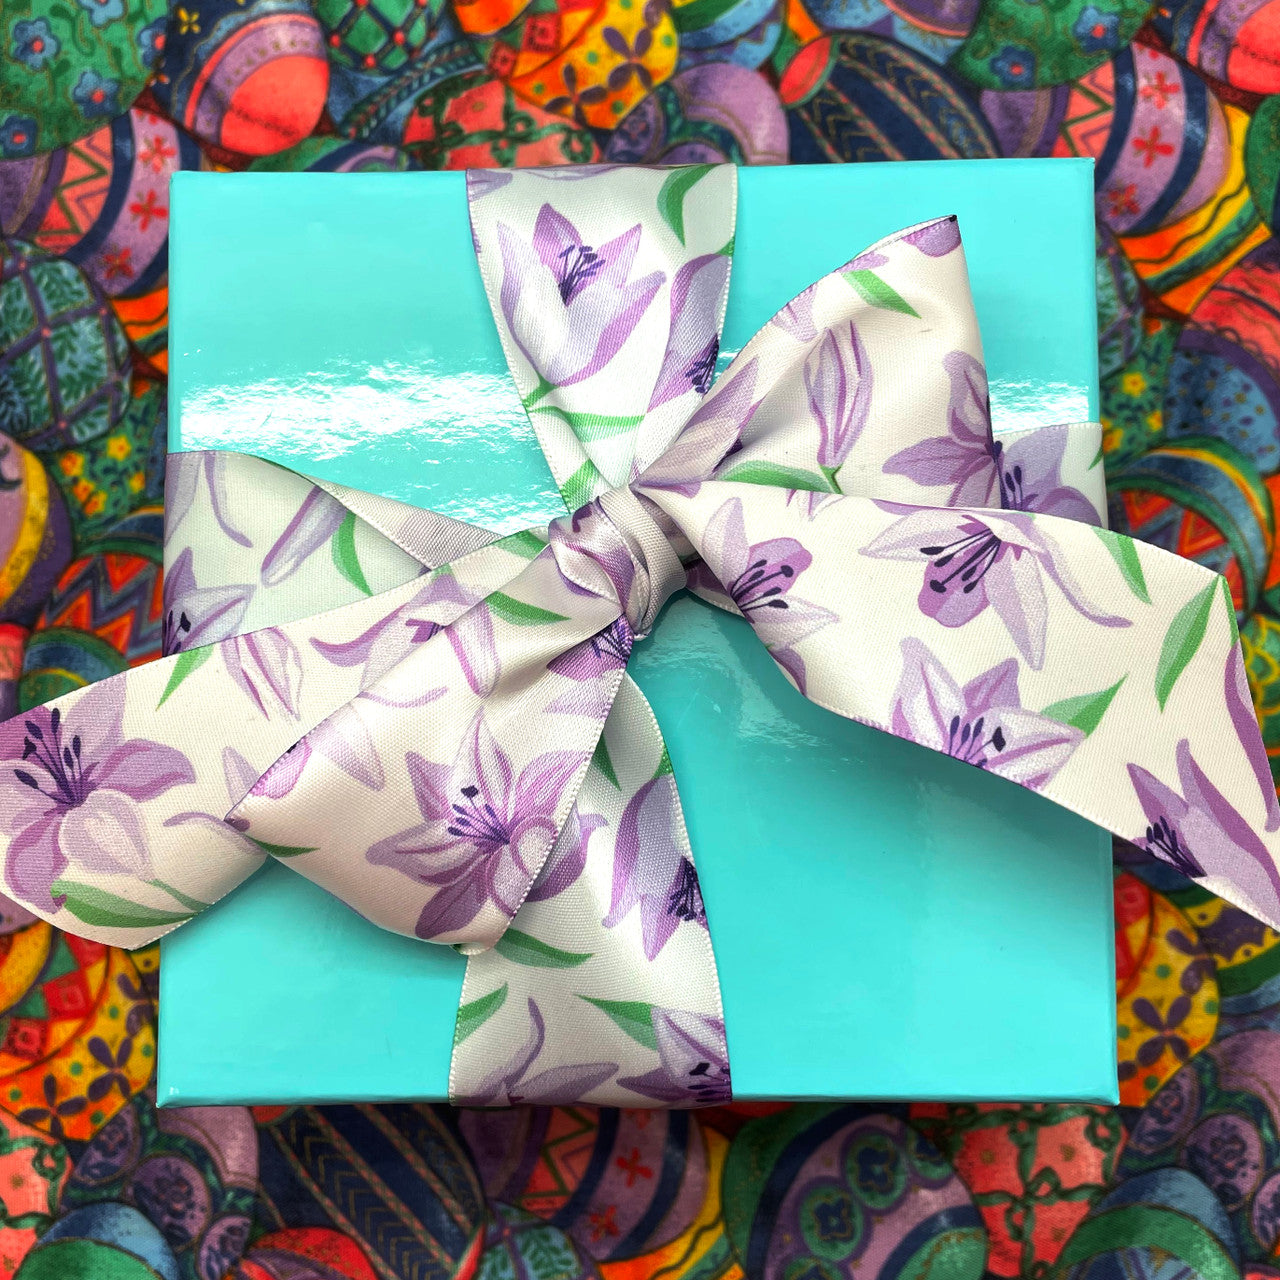 The perfect addition to a gift box is this beautiful luxury ribbon tied in the perfect bow!